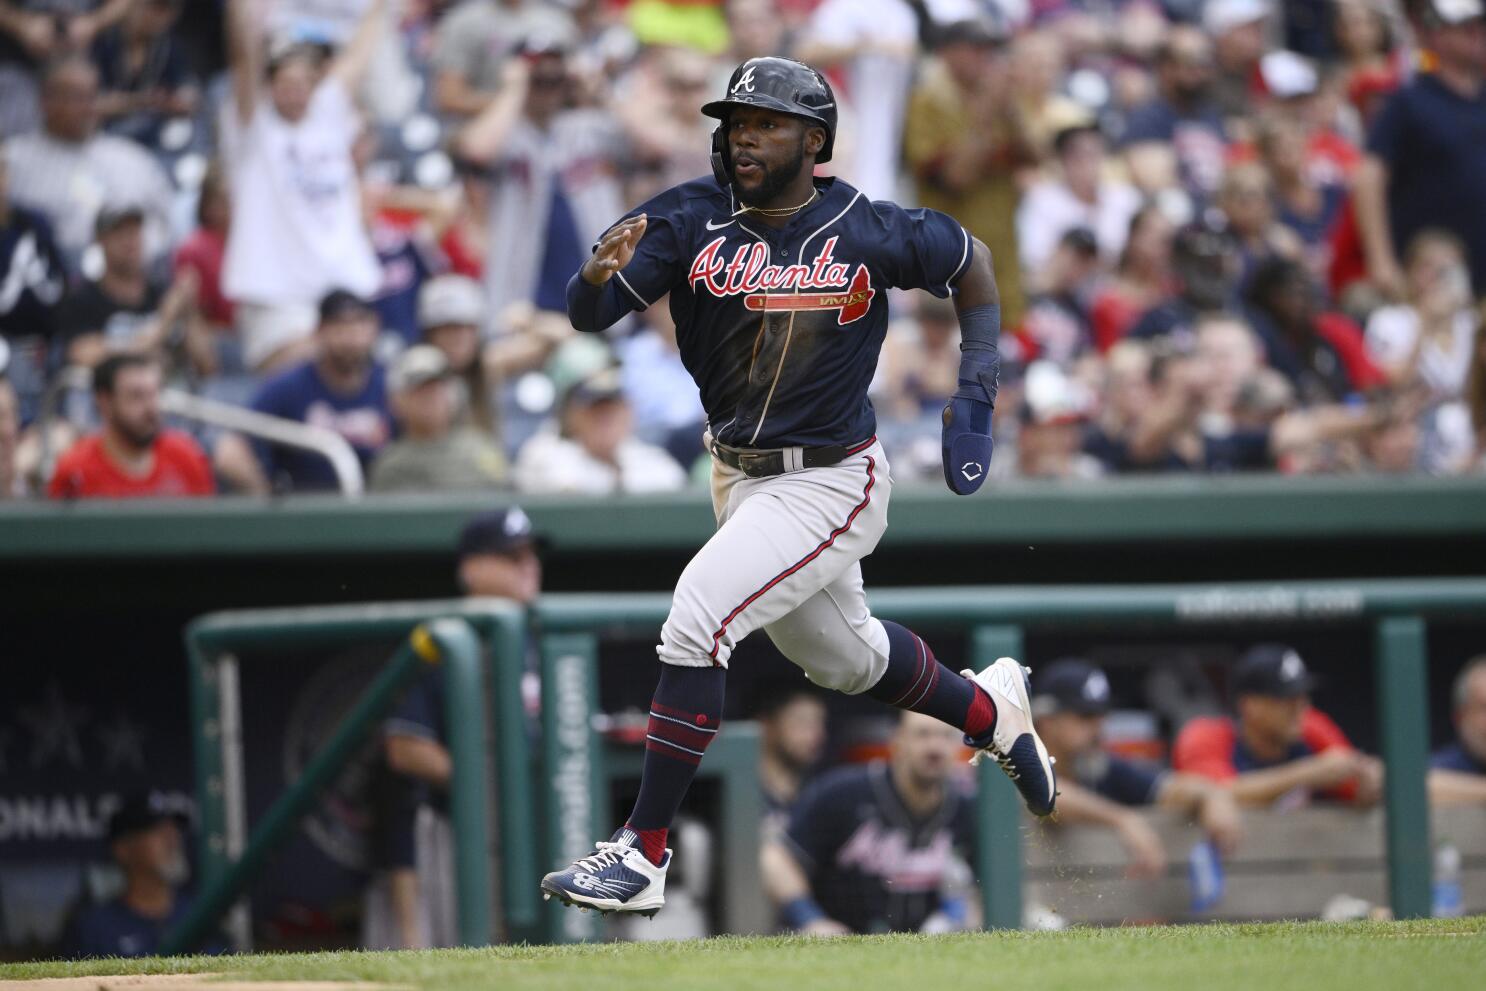 Sources: Braves close to signing Michael Harris II to contract extension